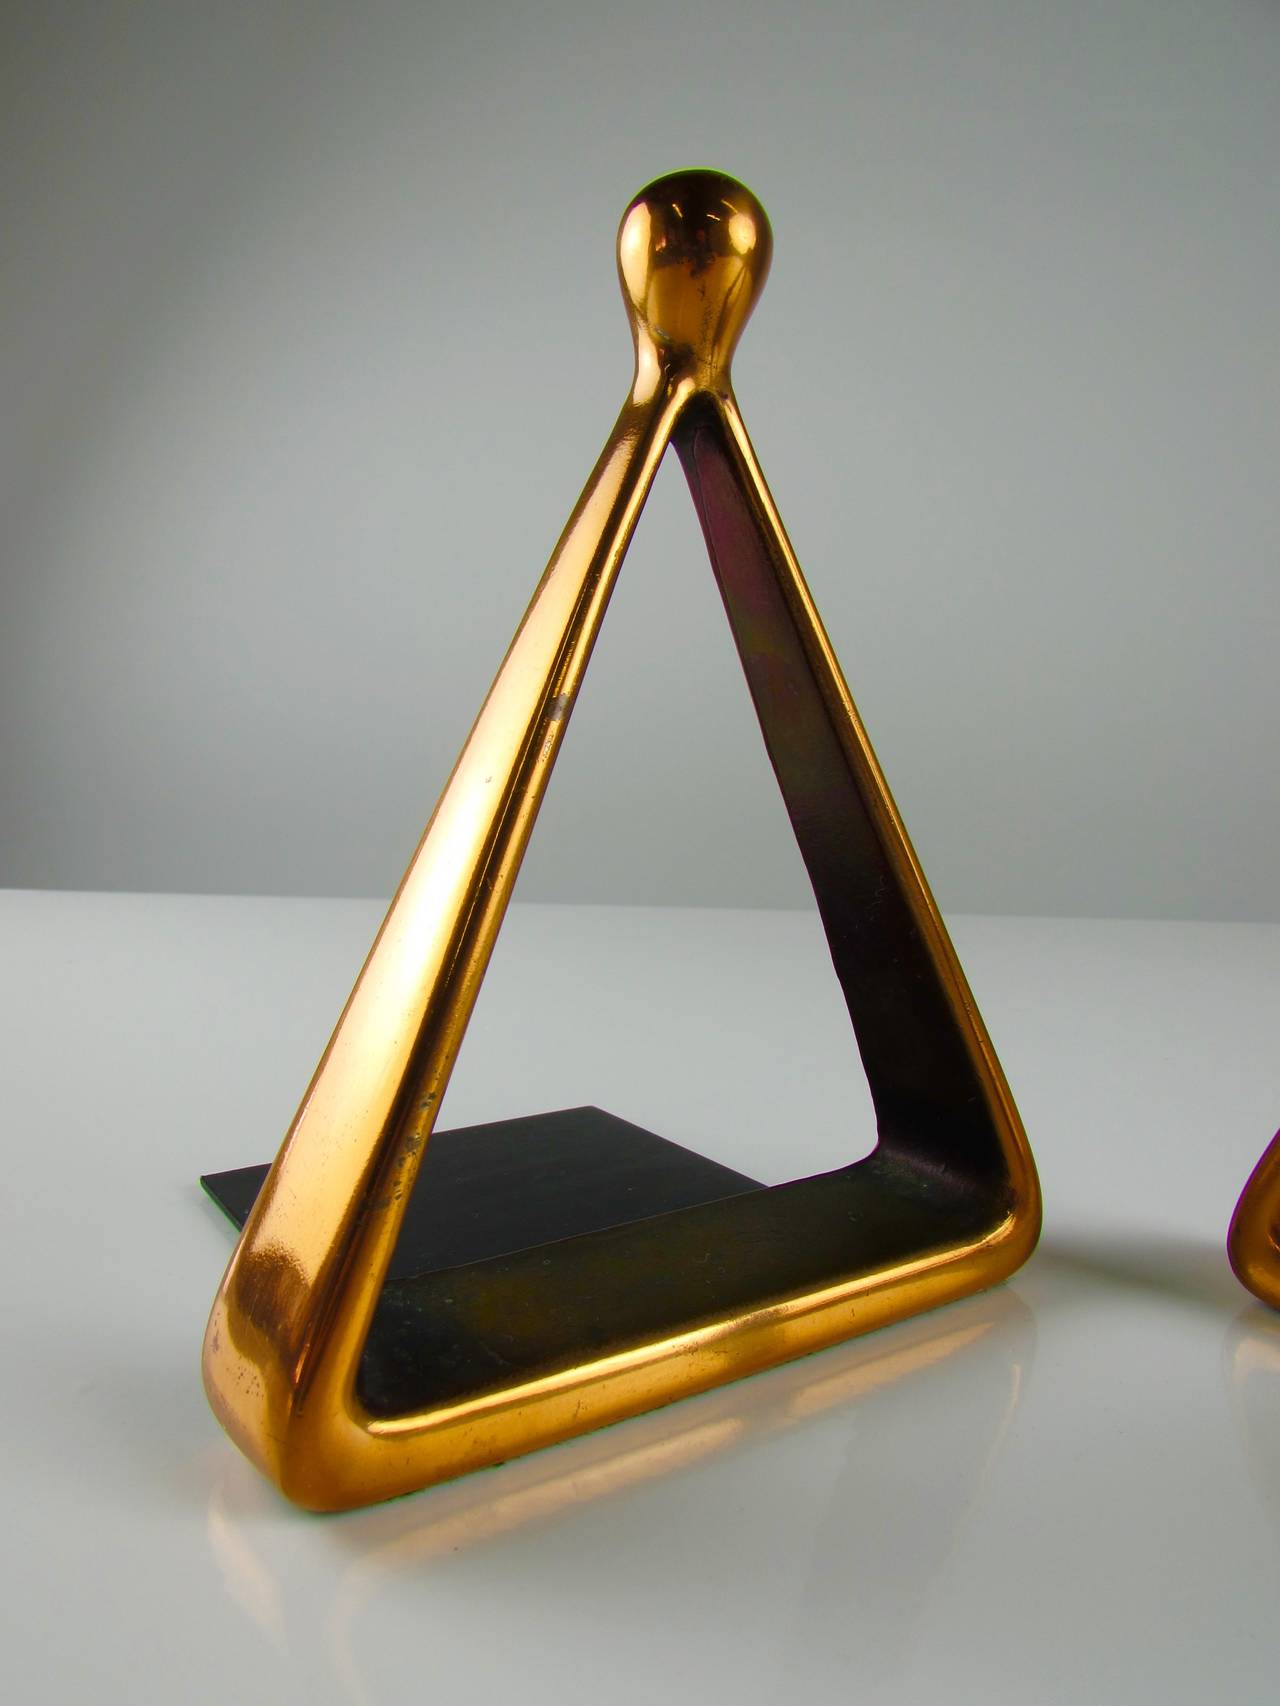 Mid-20th Century Pristine Pair of Copper Stirrup Bookends by Ben Seibel for Jenfred Ware, 1950s